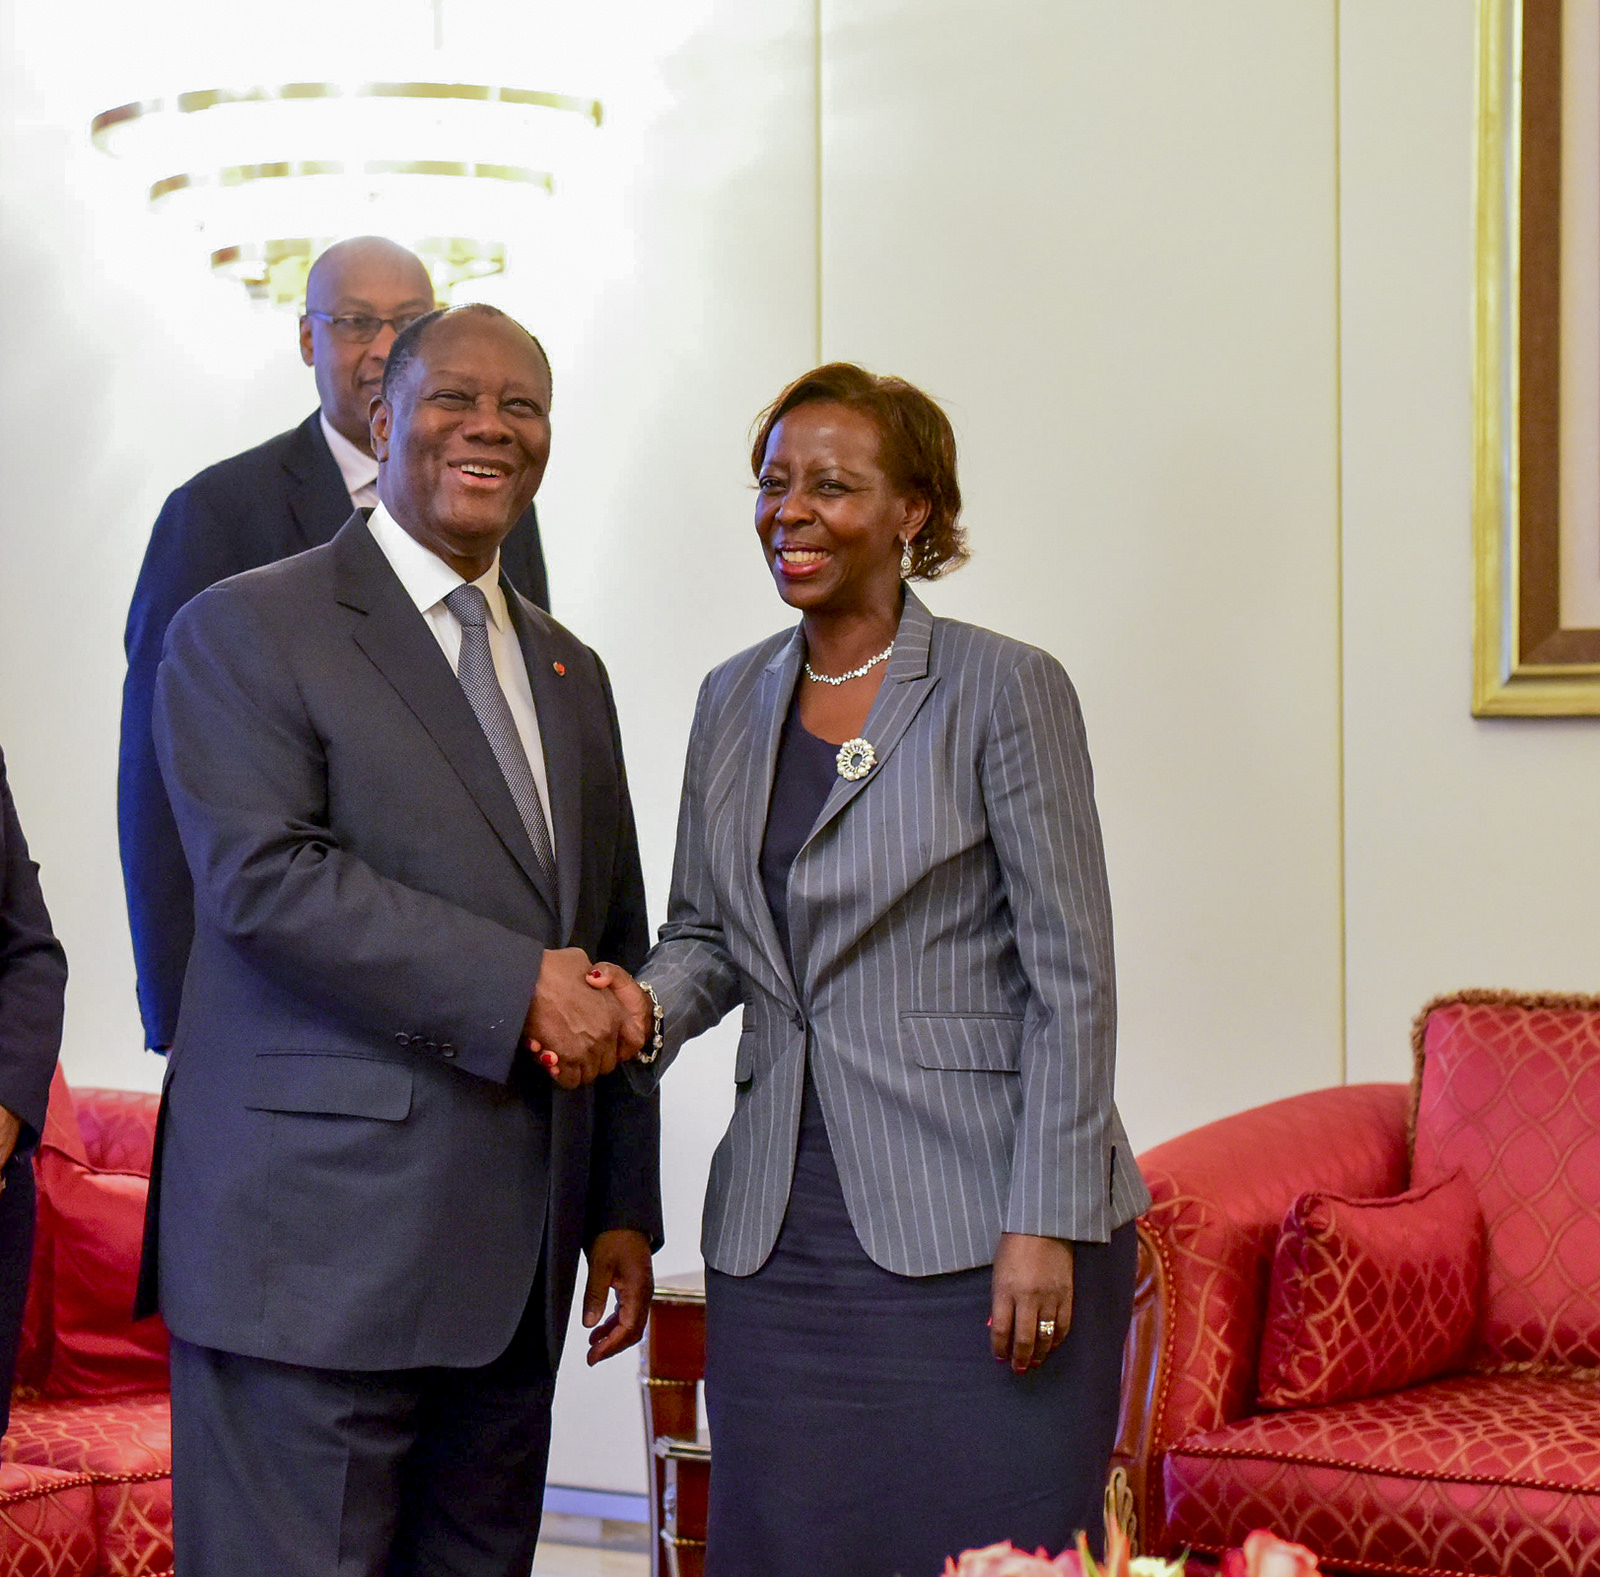 Minister Louise Mushikiwabo visits CÃ´te d'Ivoire as part of her campaign for the post of Secretary General of the International Organization of La Francophonie.